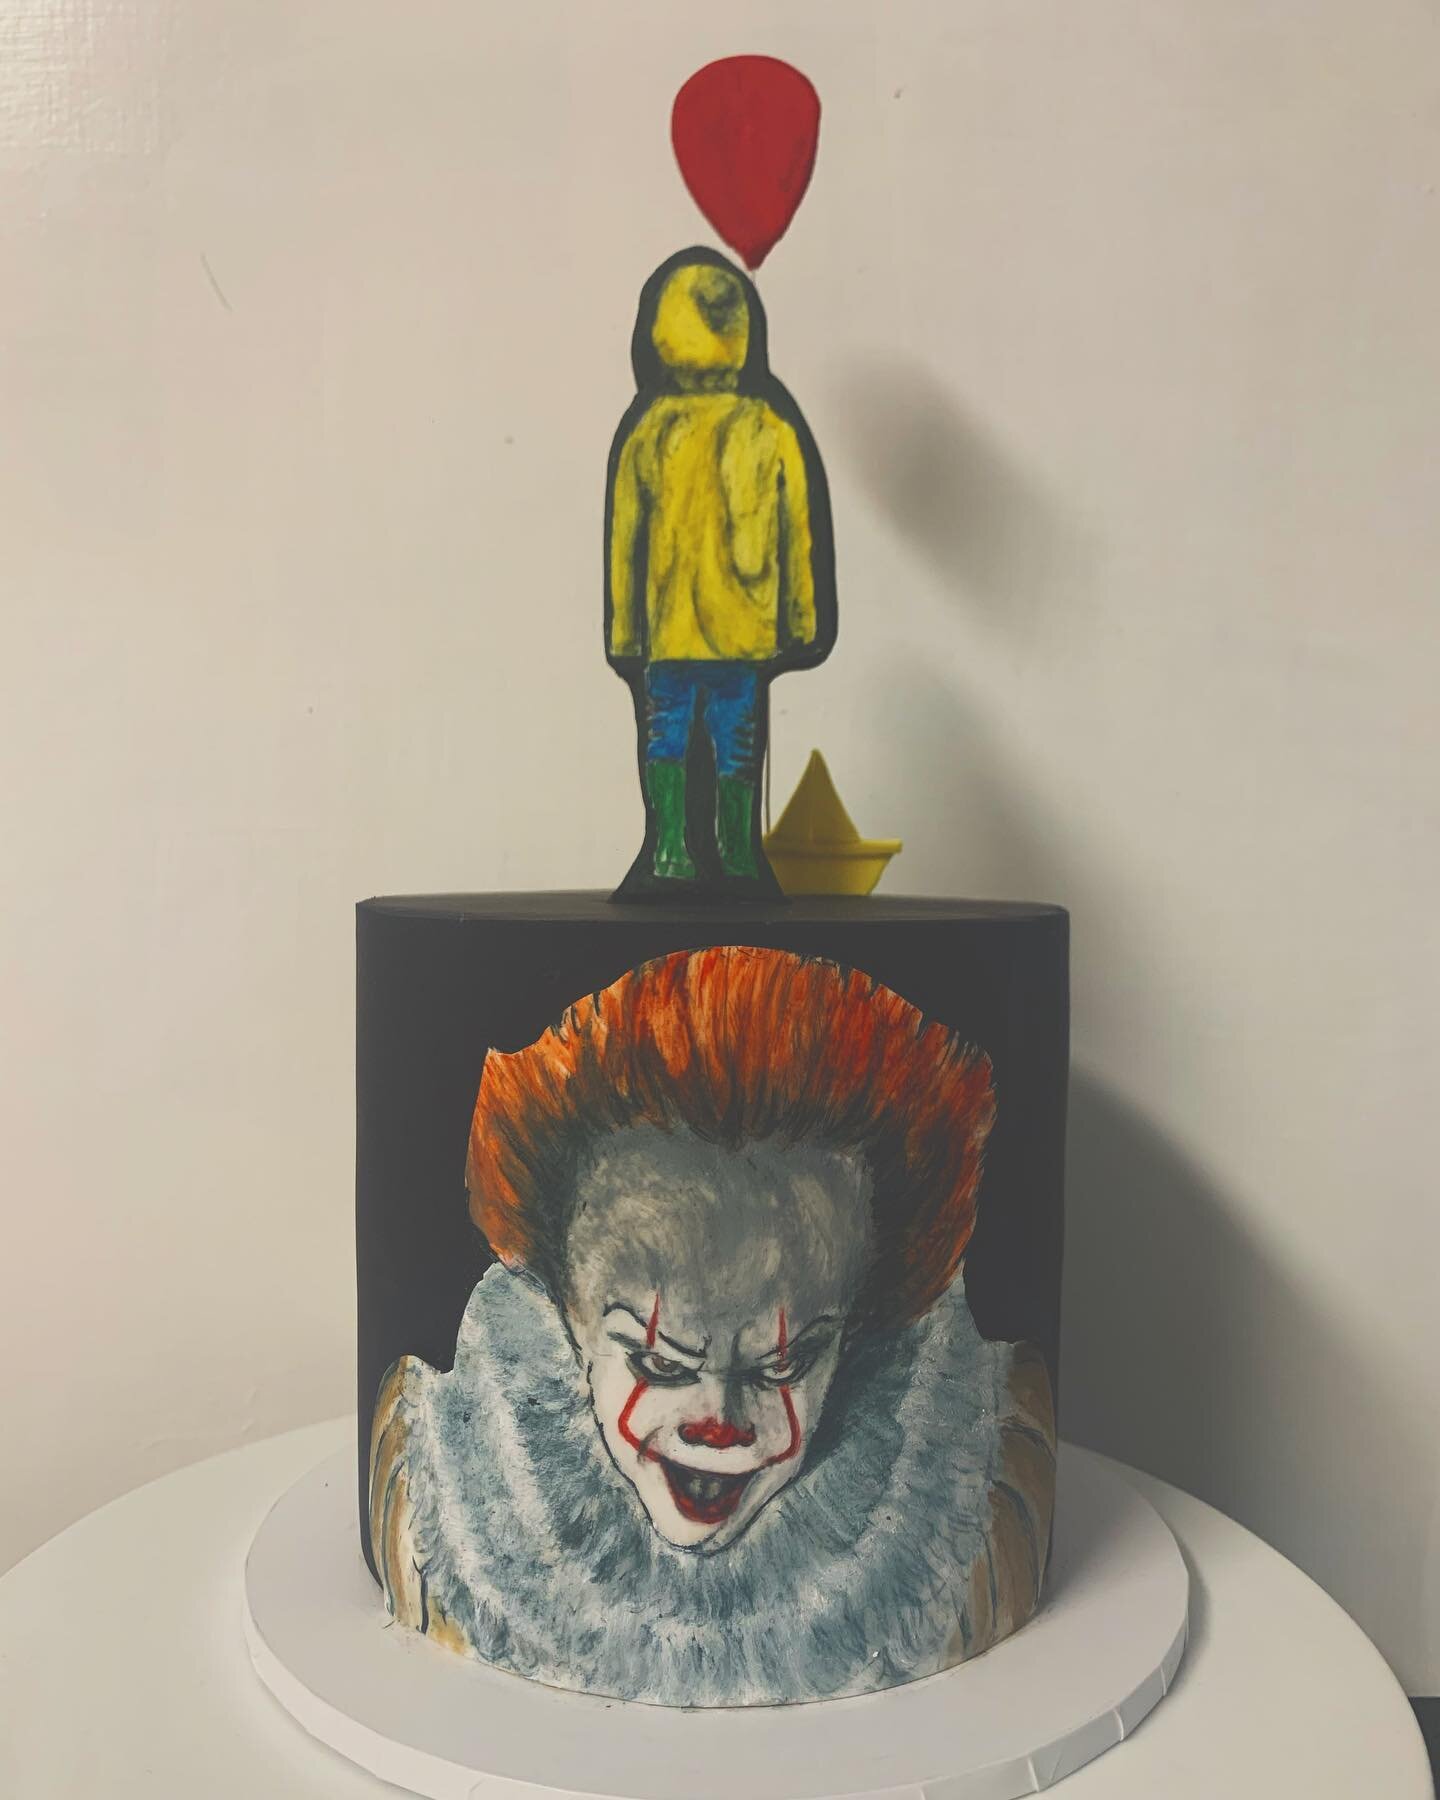 WEEK 3  CAKE COMP

We all float down here 🎈

The current Pennywise, hand painted and he has been giving me the creeps all week 😭

Will be announcing the winner soon ! 

Good luck to all that have entered 

#wannaballoon 

#pennywise #pennywisethecl